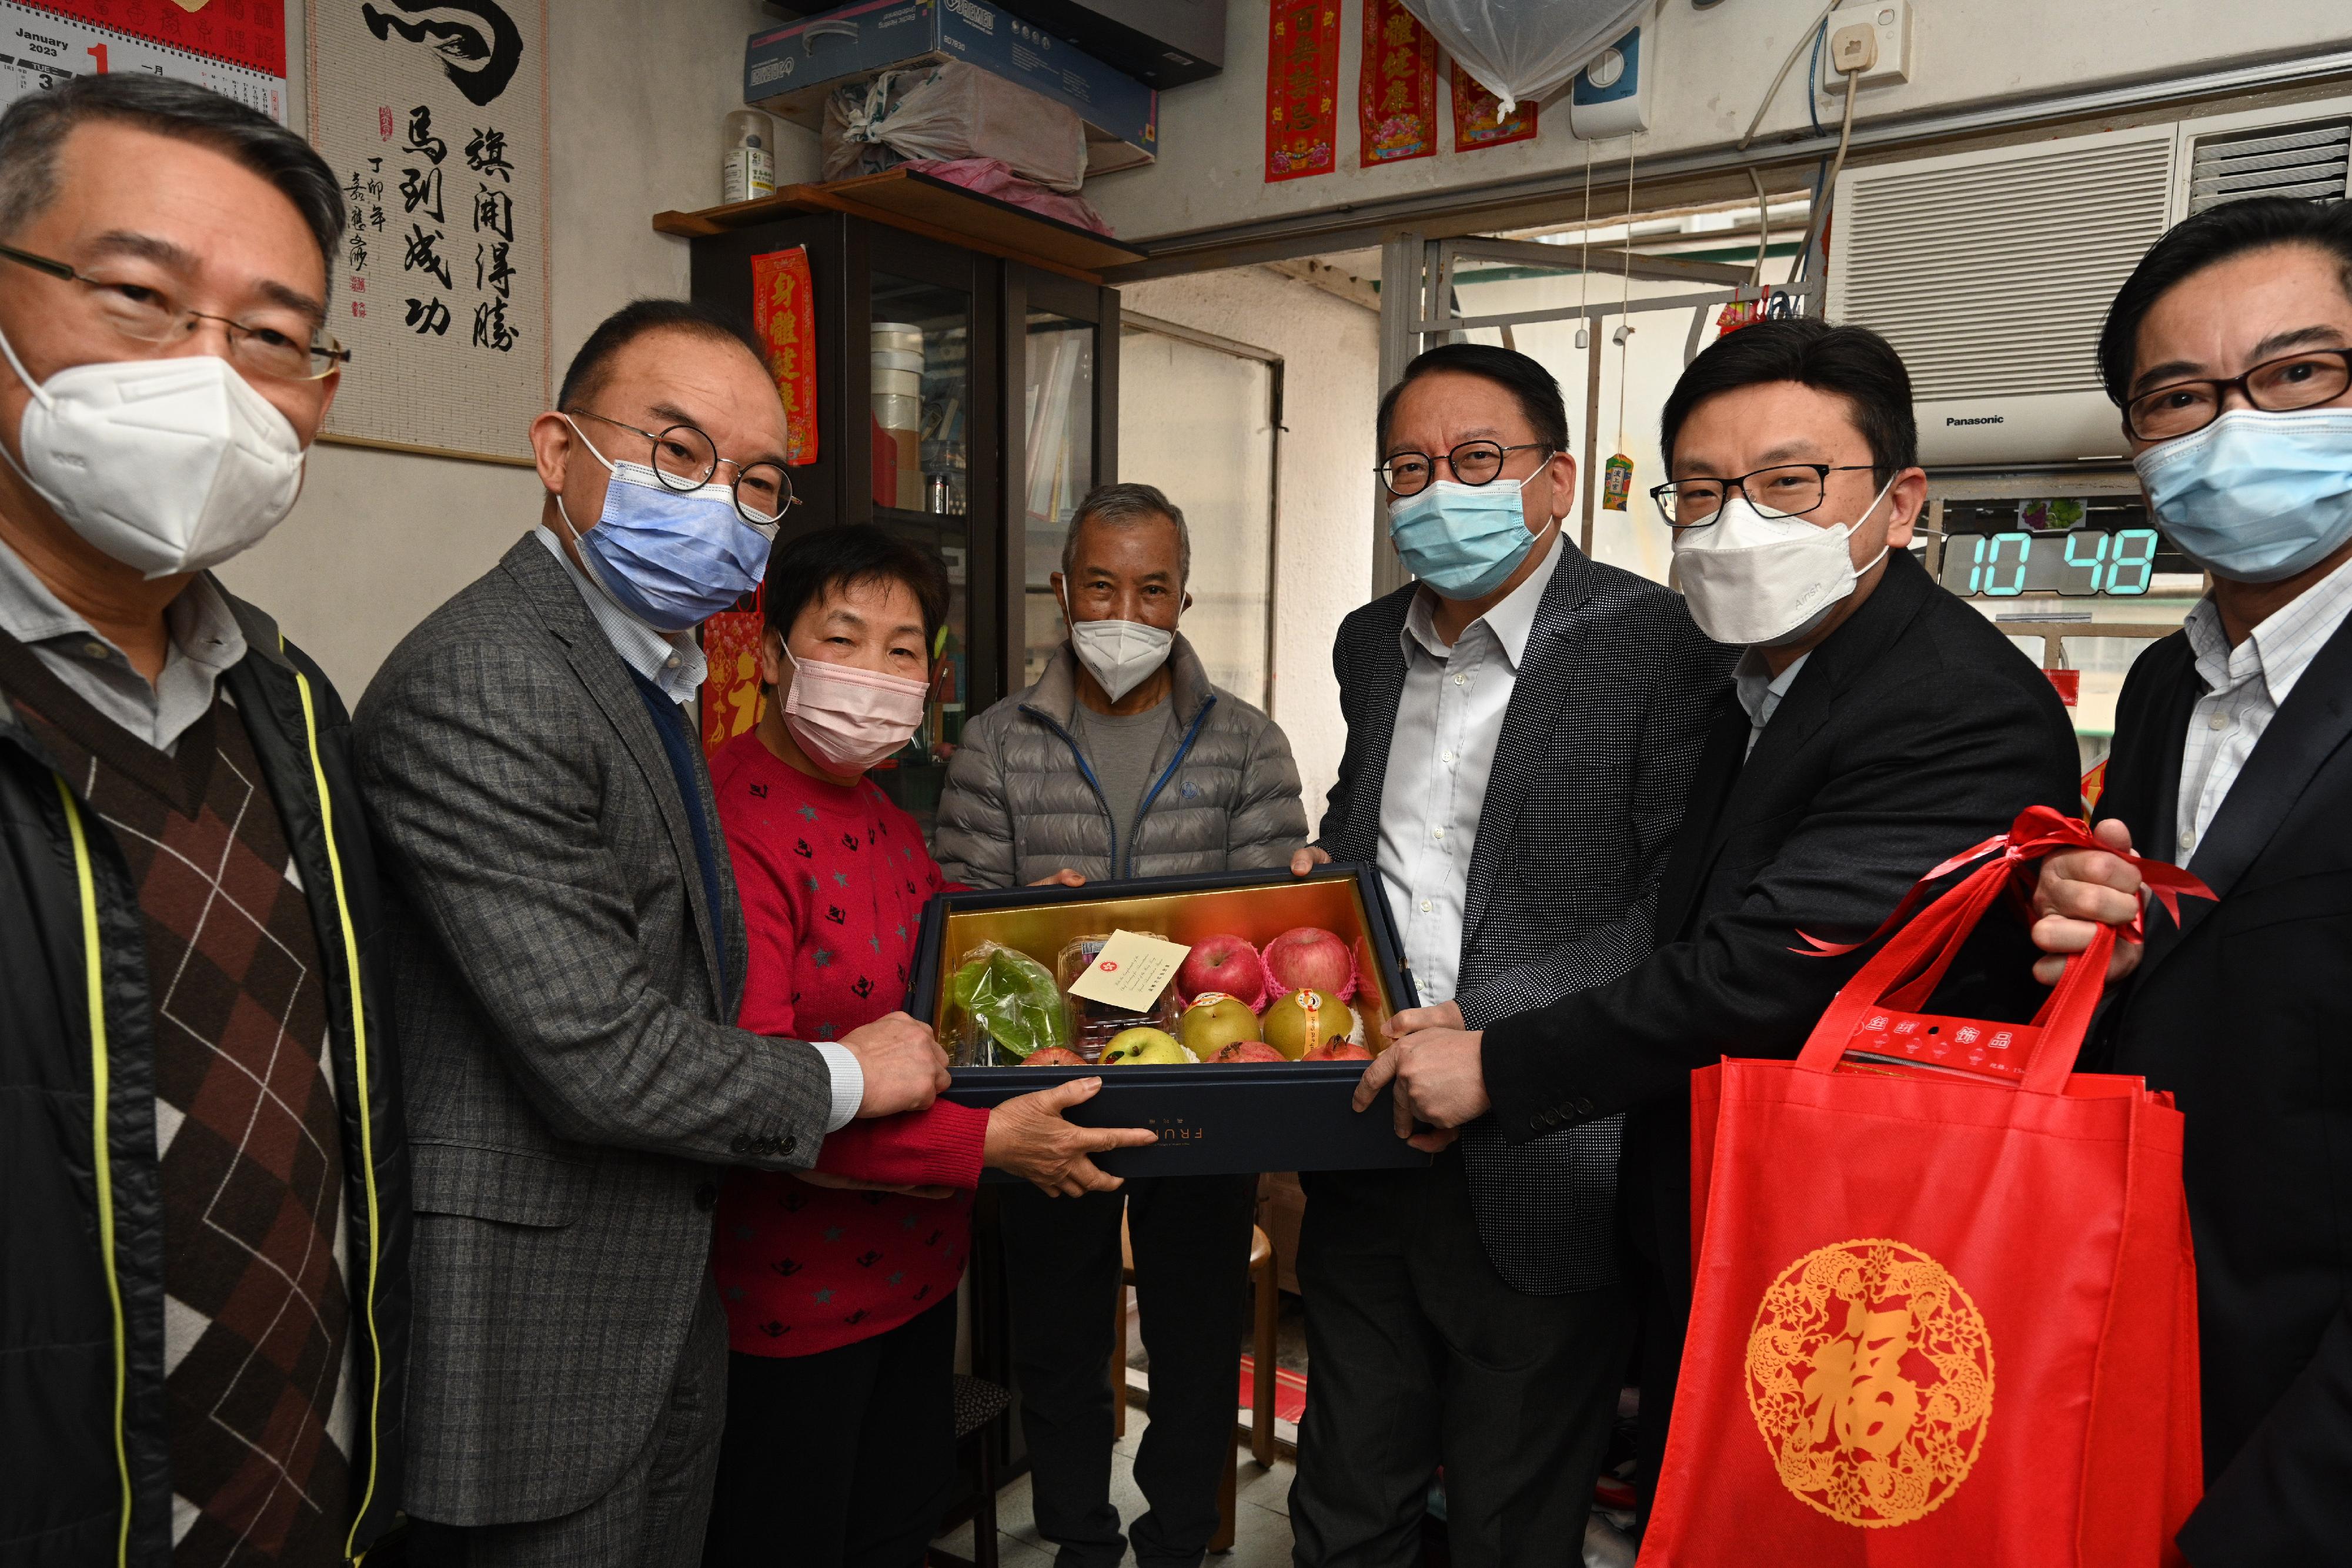 The Chief Secretary for Administration, Mr Chan Kwok-ki, and the Deputy Chief Secretary for Administration, Mr Cheuk Wing-hing, together with a number of Principal Officials, visited grass-roots families in the Eastern District to distribute Chinese New Year blessing bags and celebrate Chinese New Year with them today (January 21). Photo shows Mr Chan (third right); the Secretary for Constitutional and Mainland Affairs, Mr Erick Tsang Kwok-wai (second left); the Secretary for Labour and Welfare, Mr Chris Sun (second right); the District Officer (Eastern), Mr Simon Chan (first left); and North Point East Area Committee Member Mr Cheng Chi-sing (first right), presenting a blessing bag to an elderly singleton.